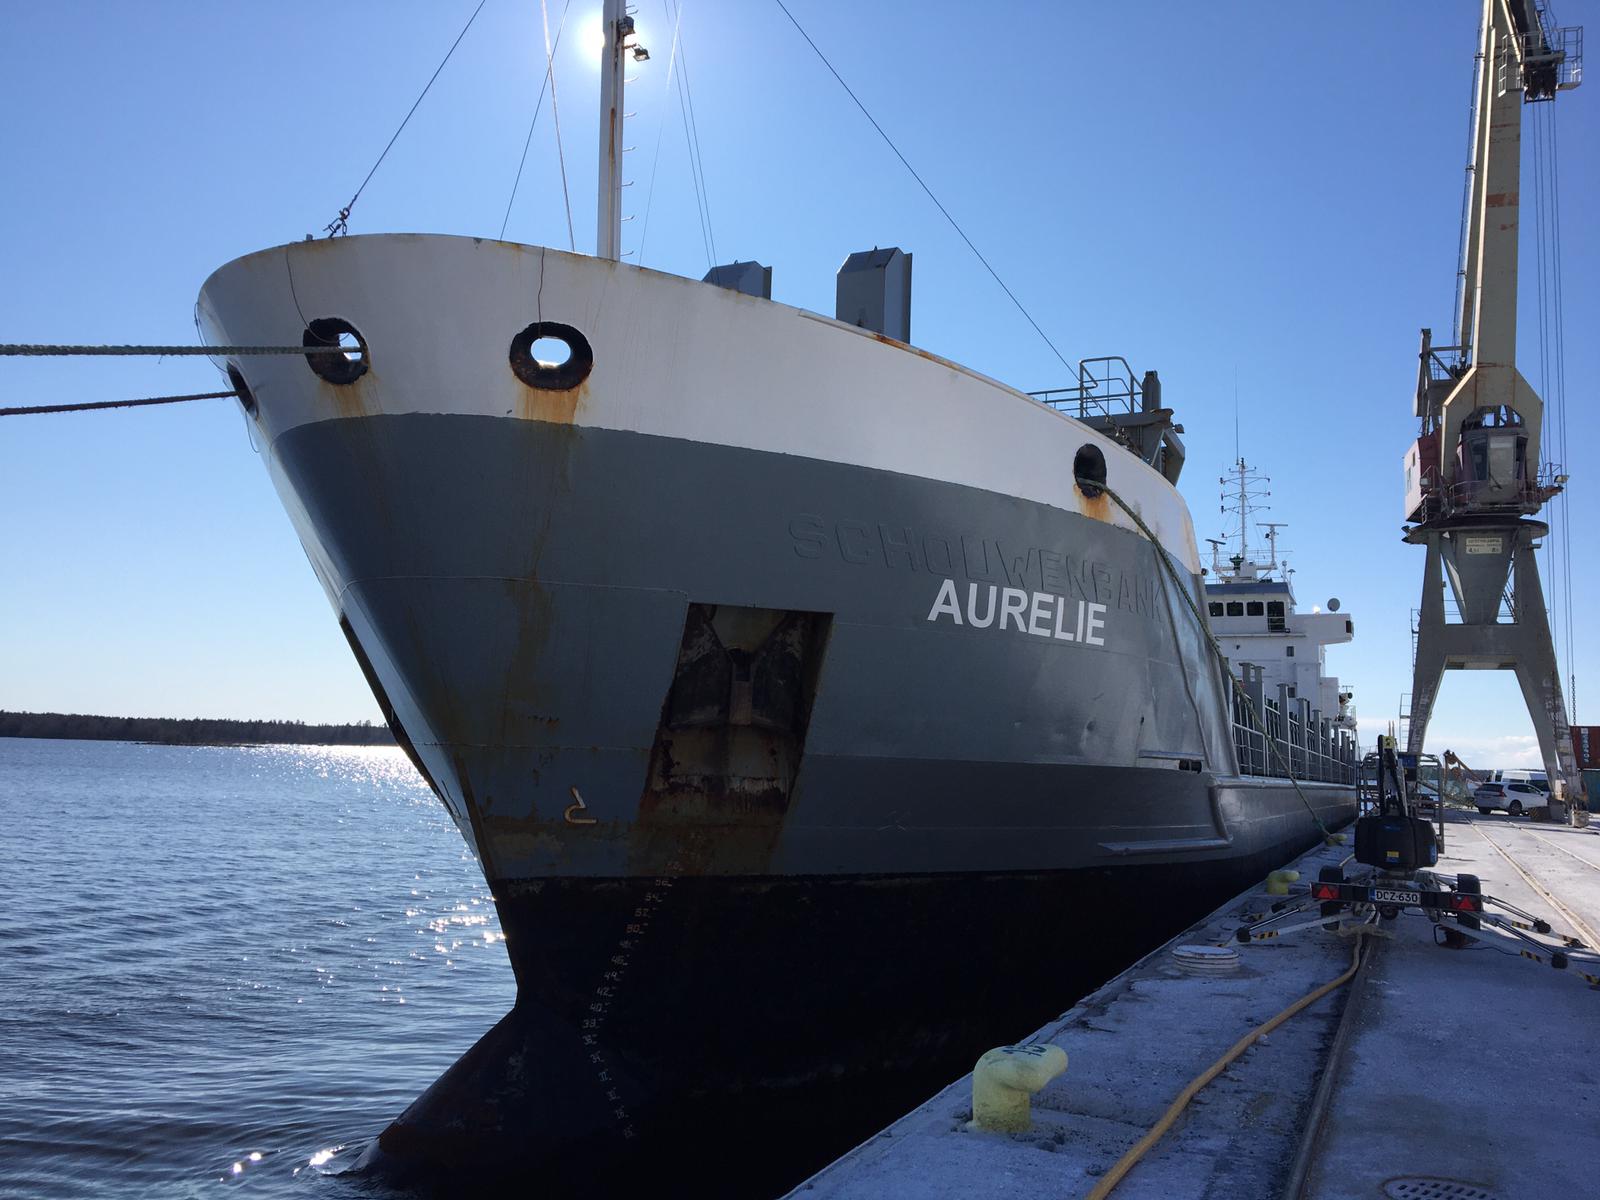 MERIAURA: MV Lottaland and Aurelie have new Owners and names